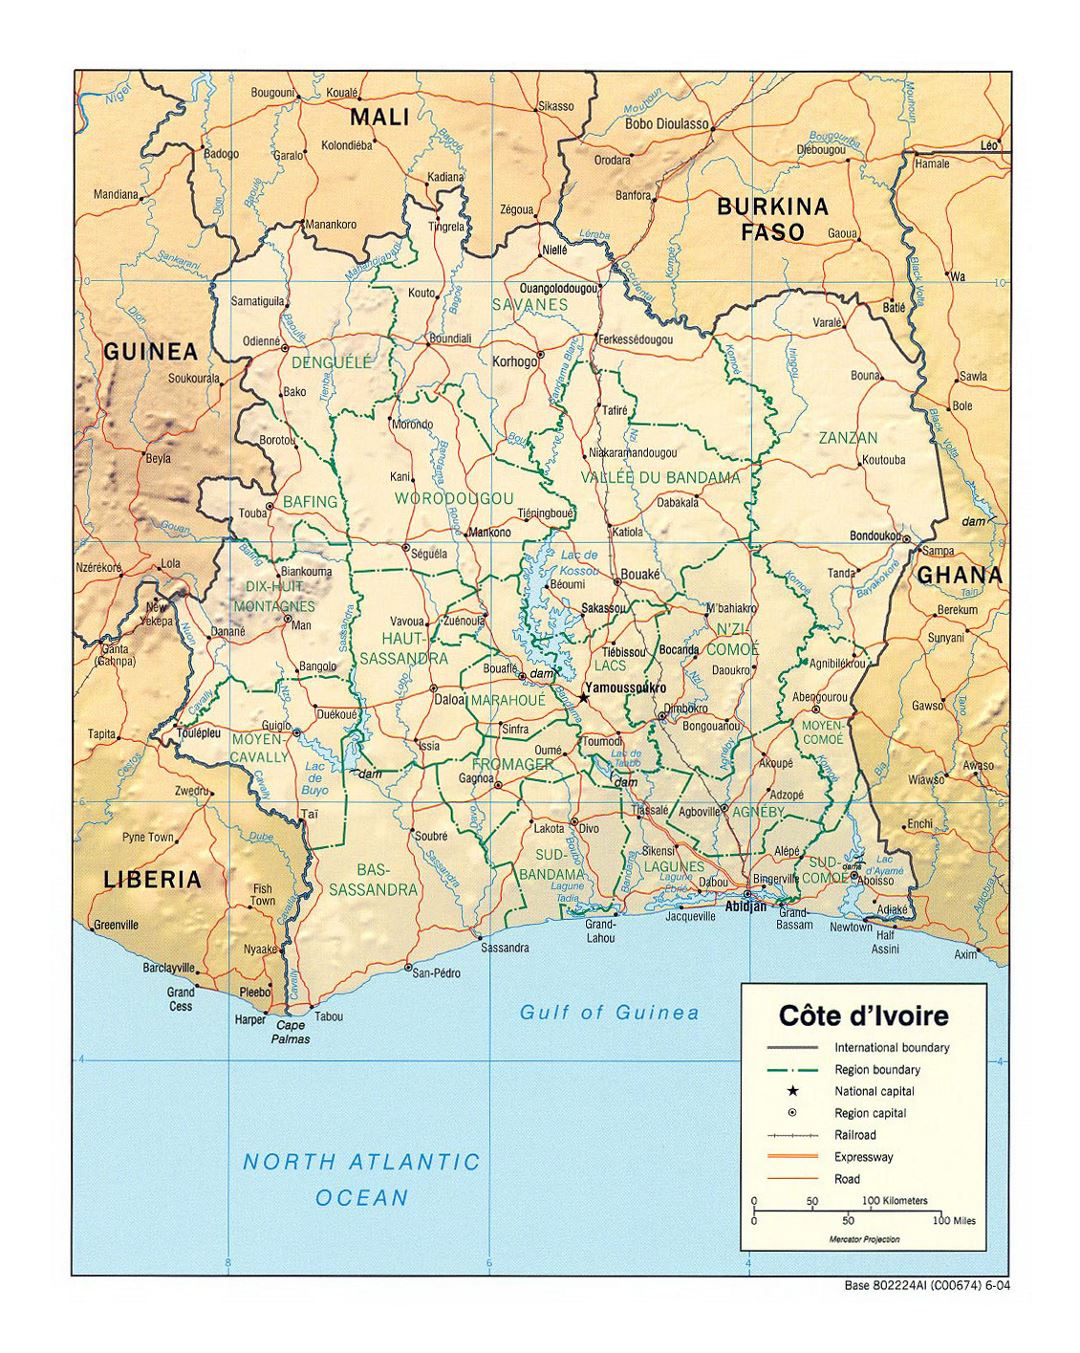 Detailed political and administrative map of Cote d'Ivoire with relief, roads, railroads and major cities - 2004